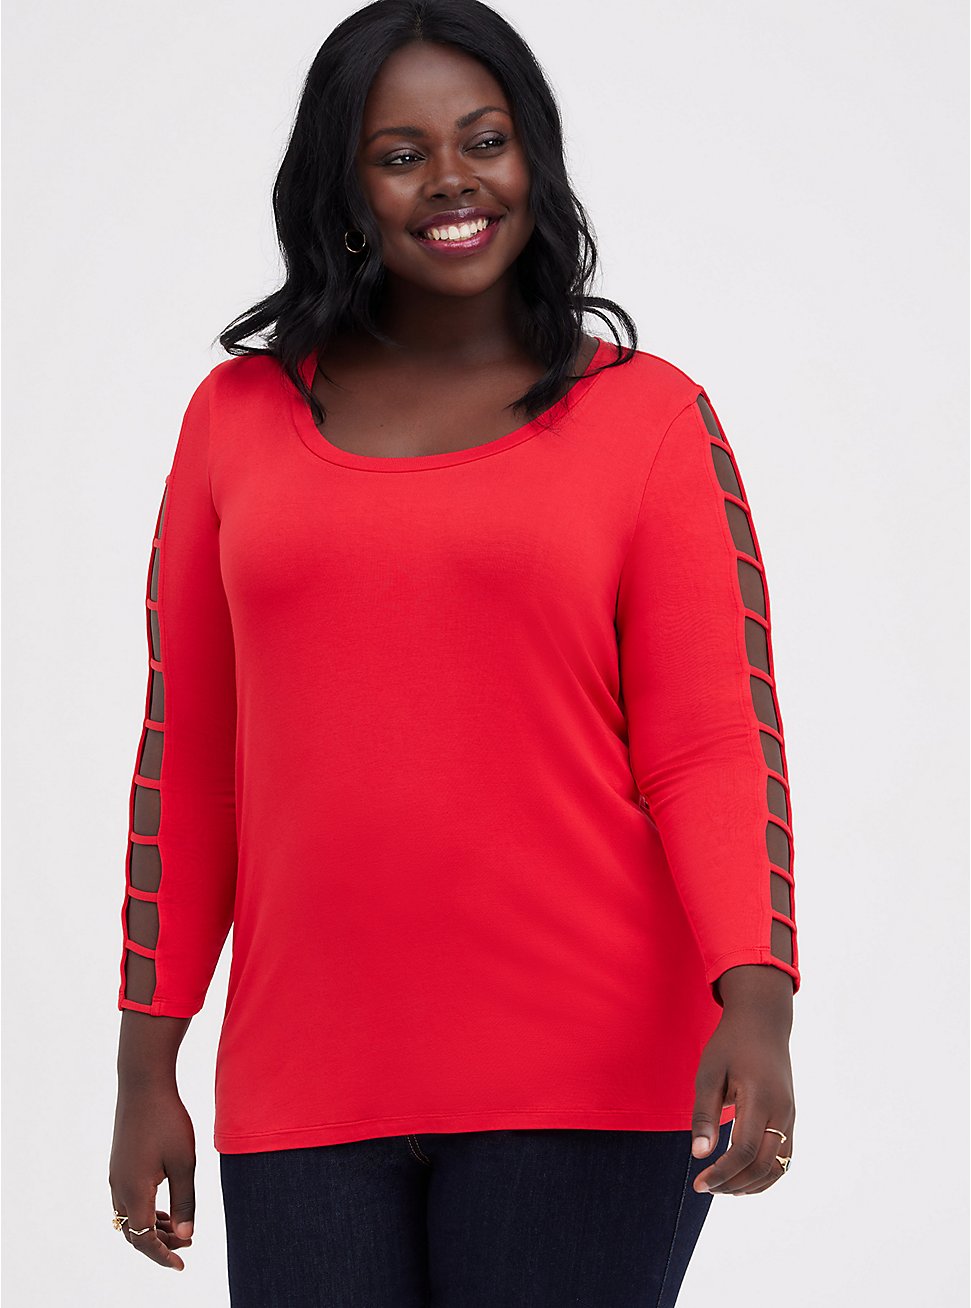 Strappy Sleeve Top - Super Soft Red, RED, hi-res